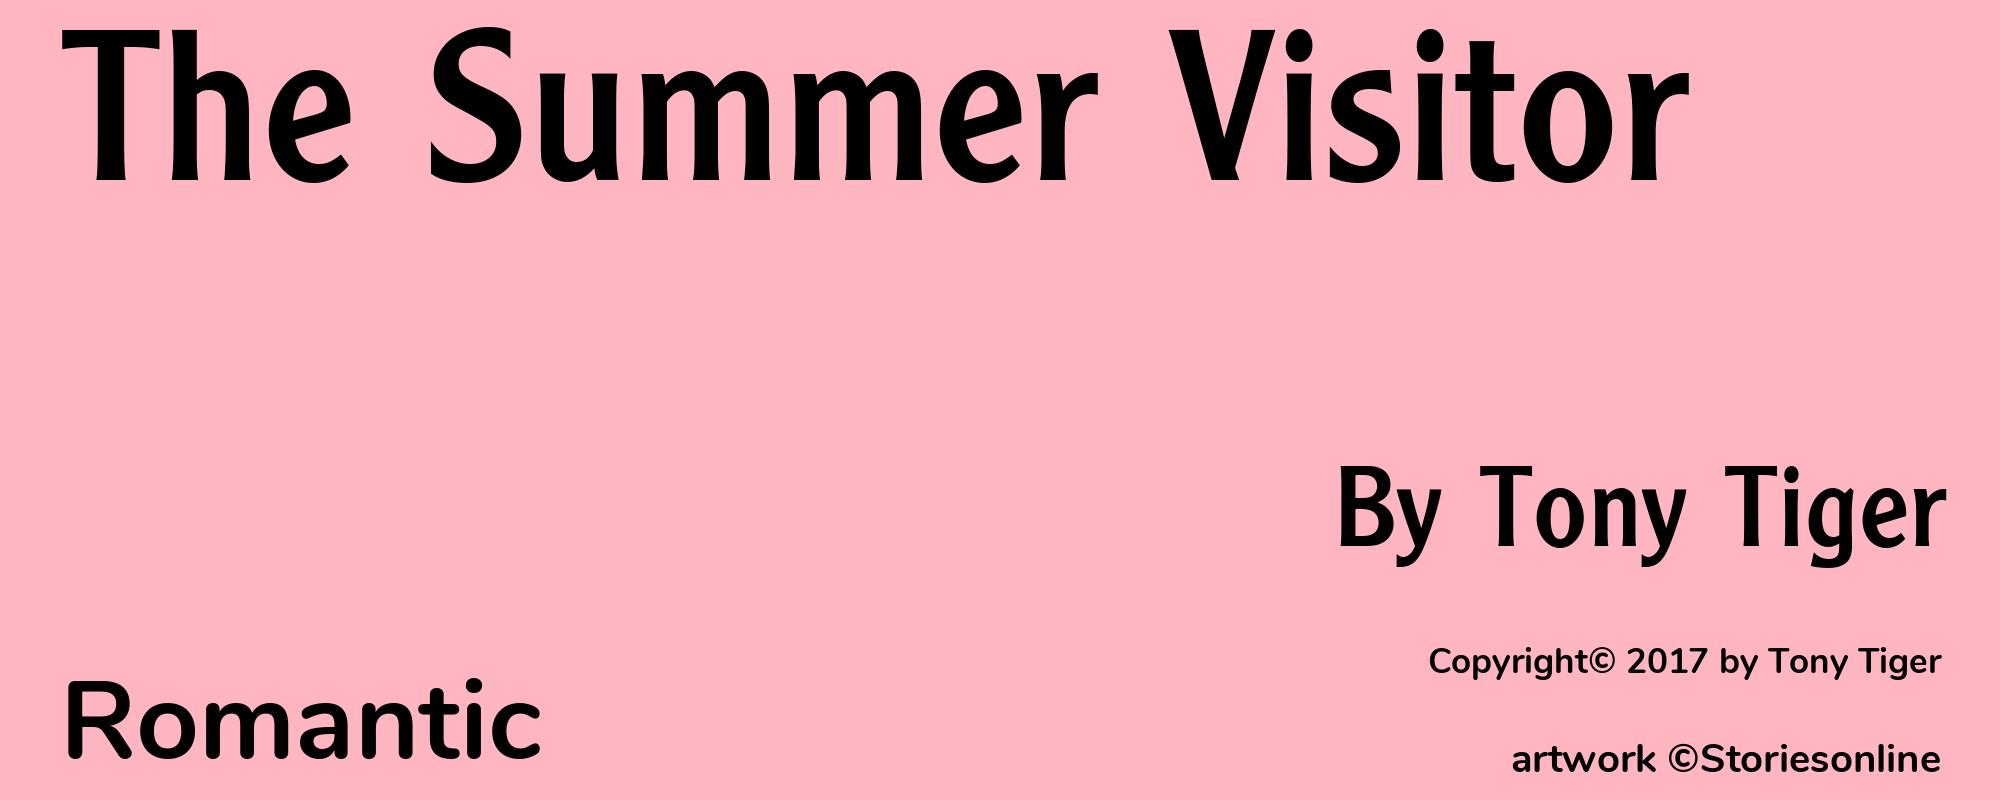 The Summer Visitor - Cover